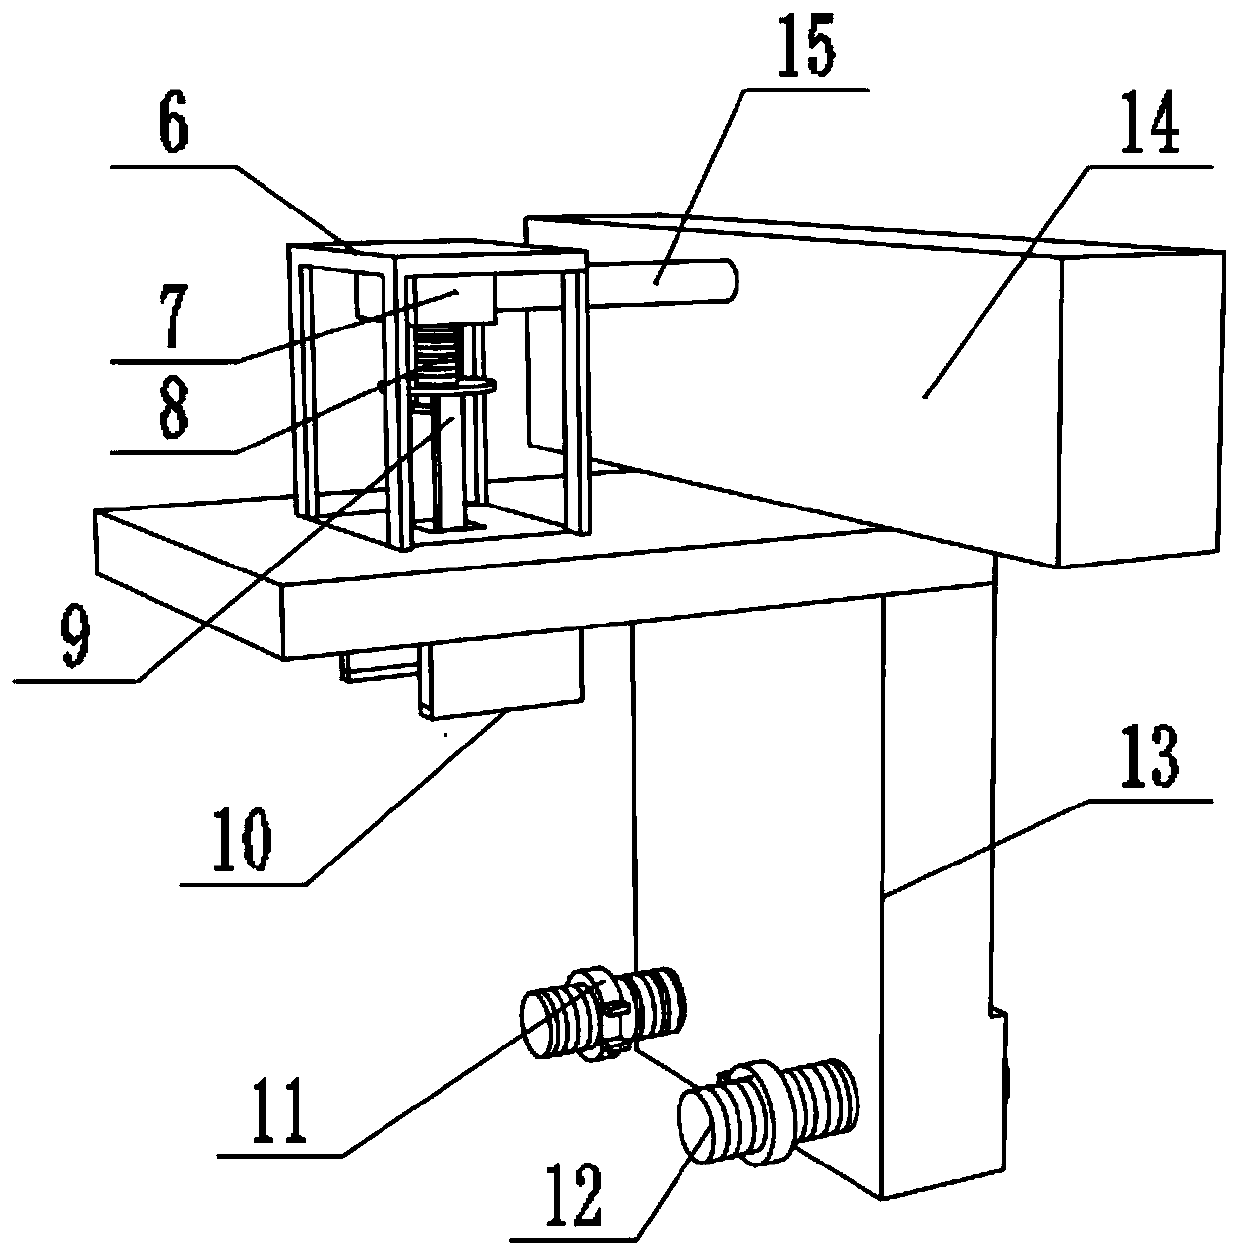 Hanging mechanism for garment conveying assembly line